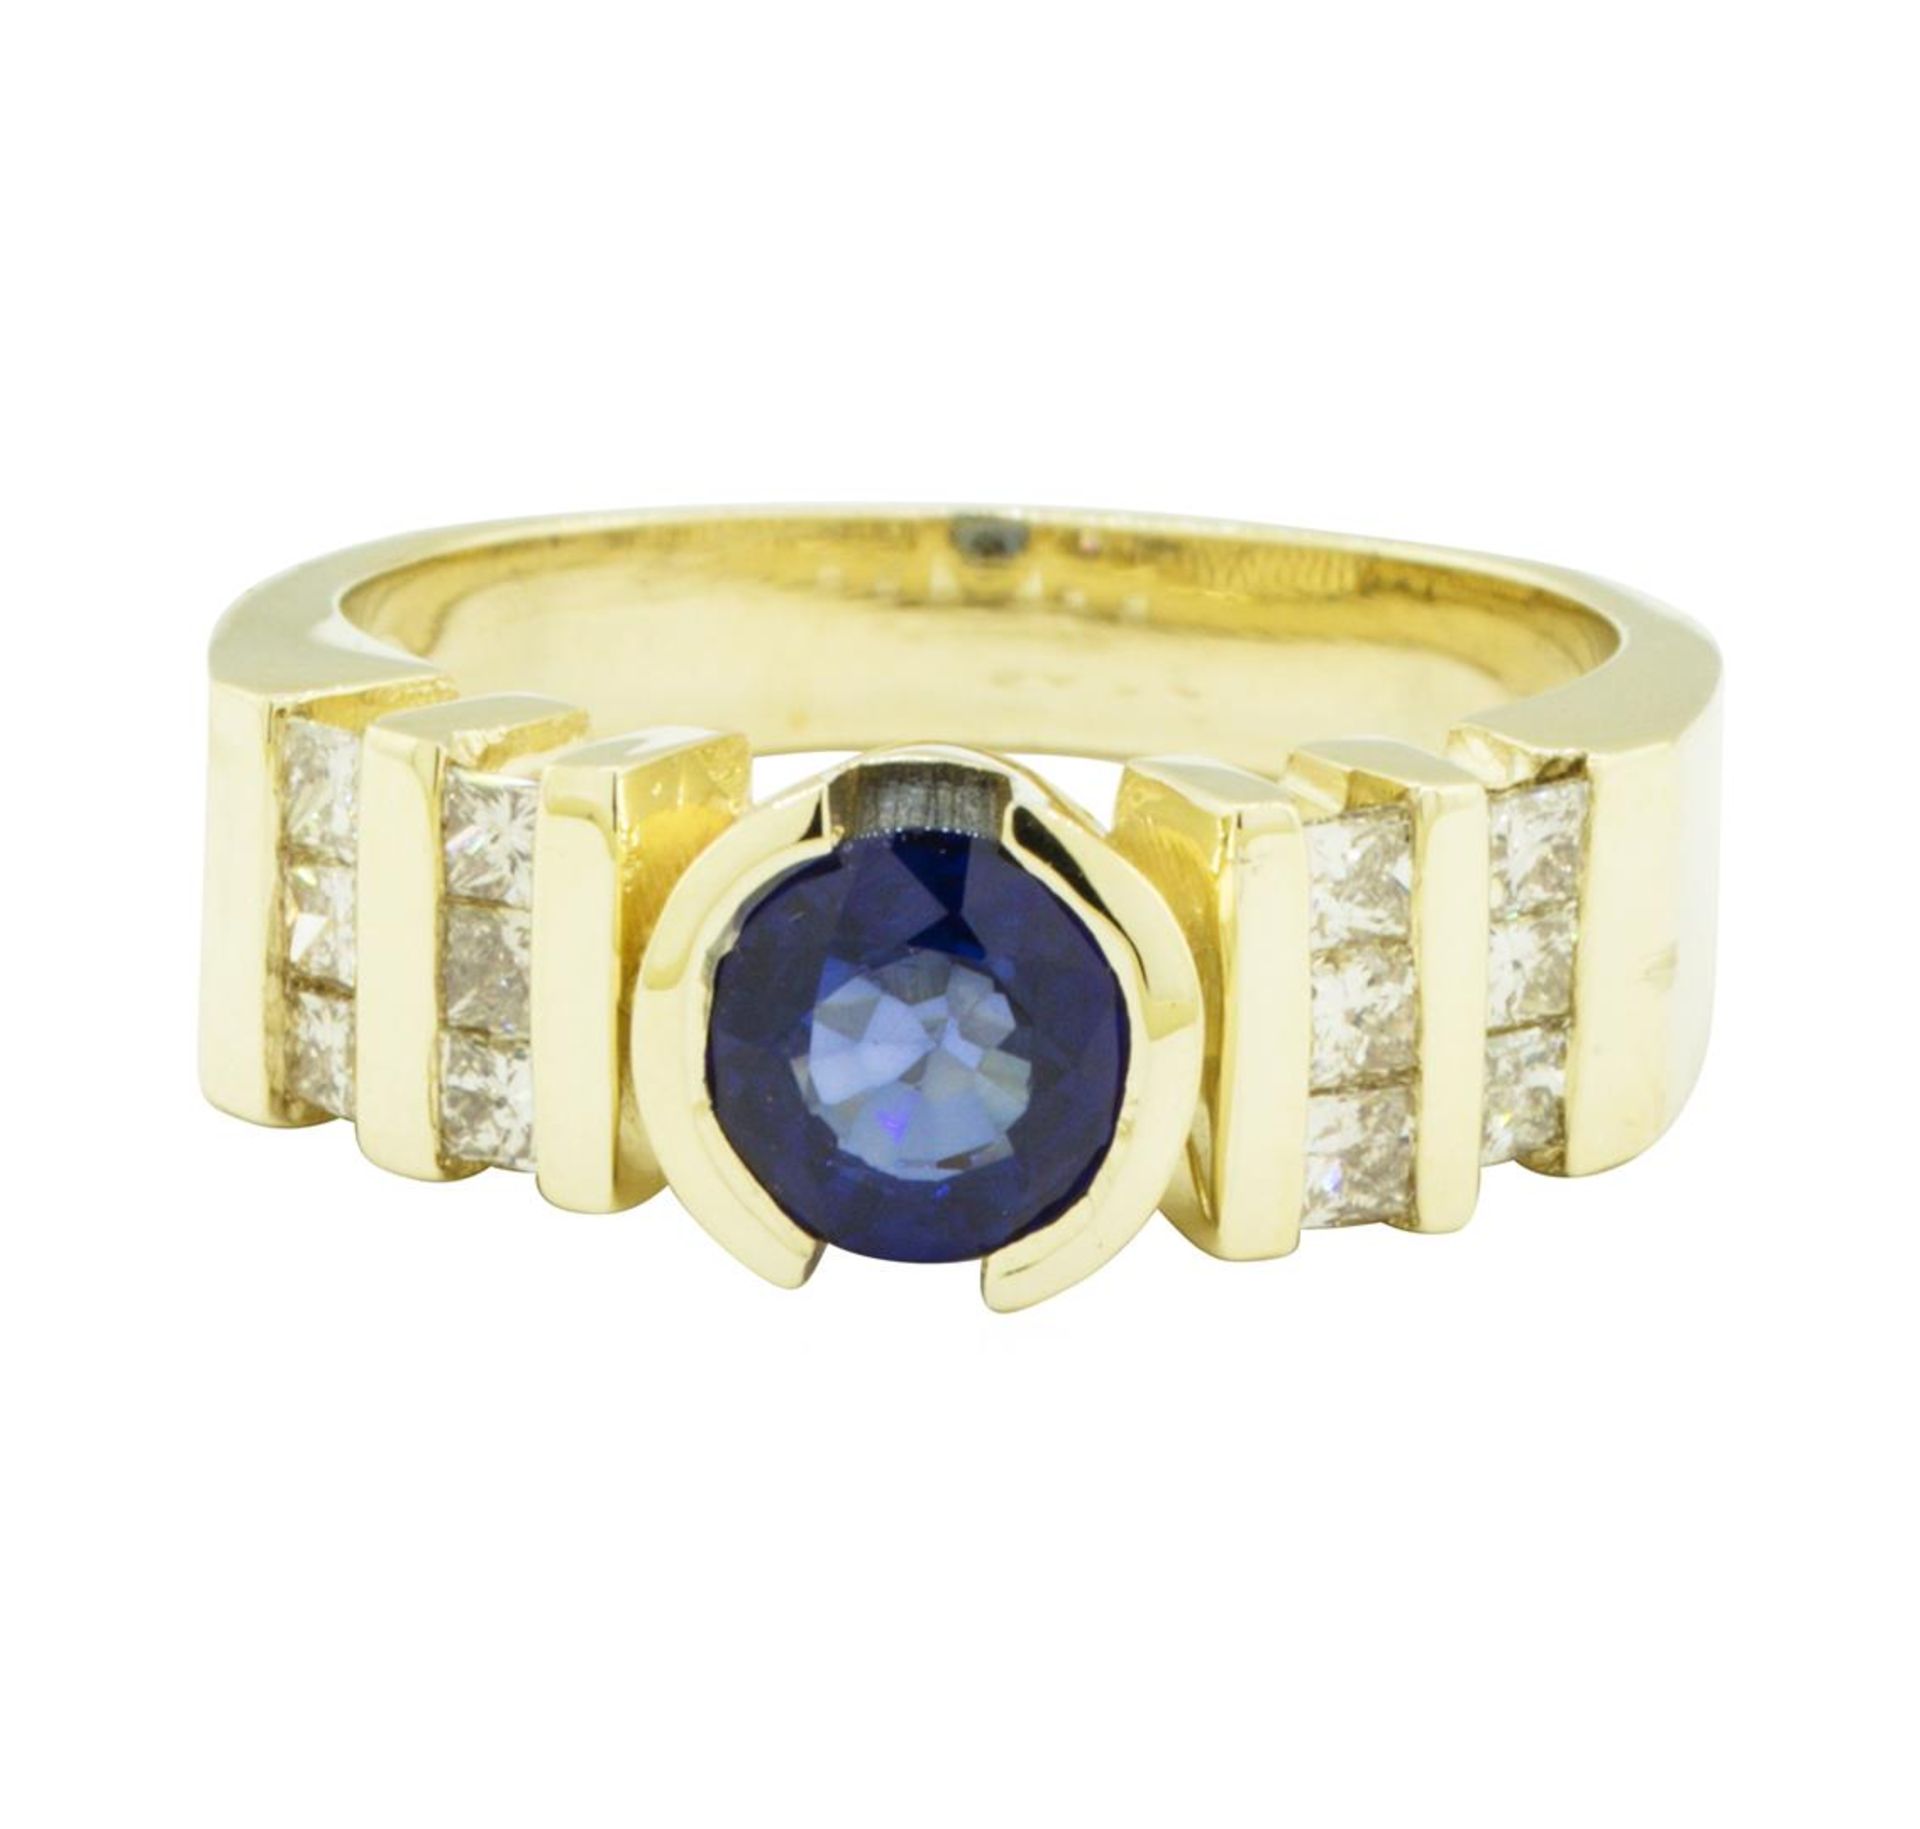 1.45ctw Blue Sapphire and Diamond Ring - 14KT Yellow Gold - Image 2 of 4